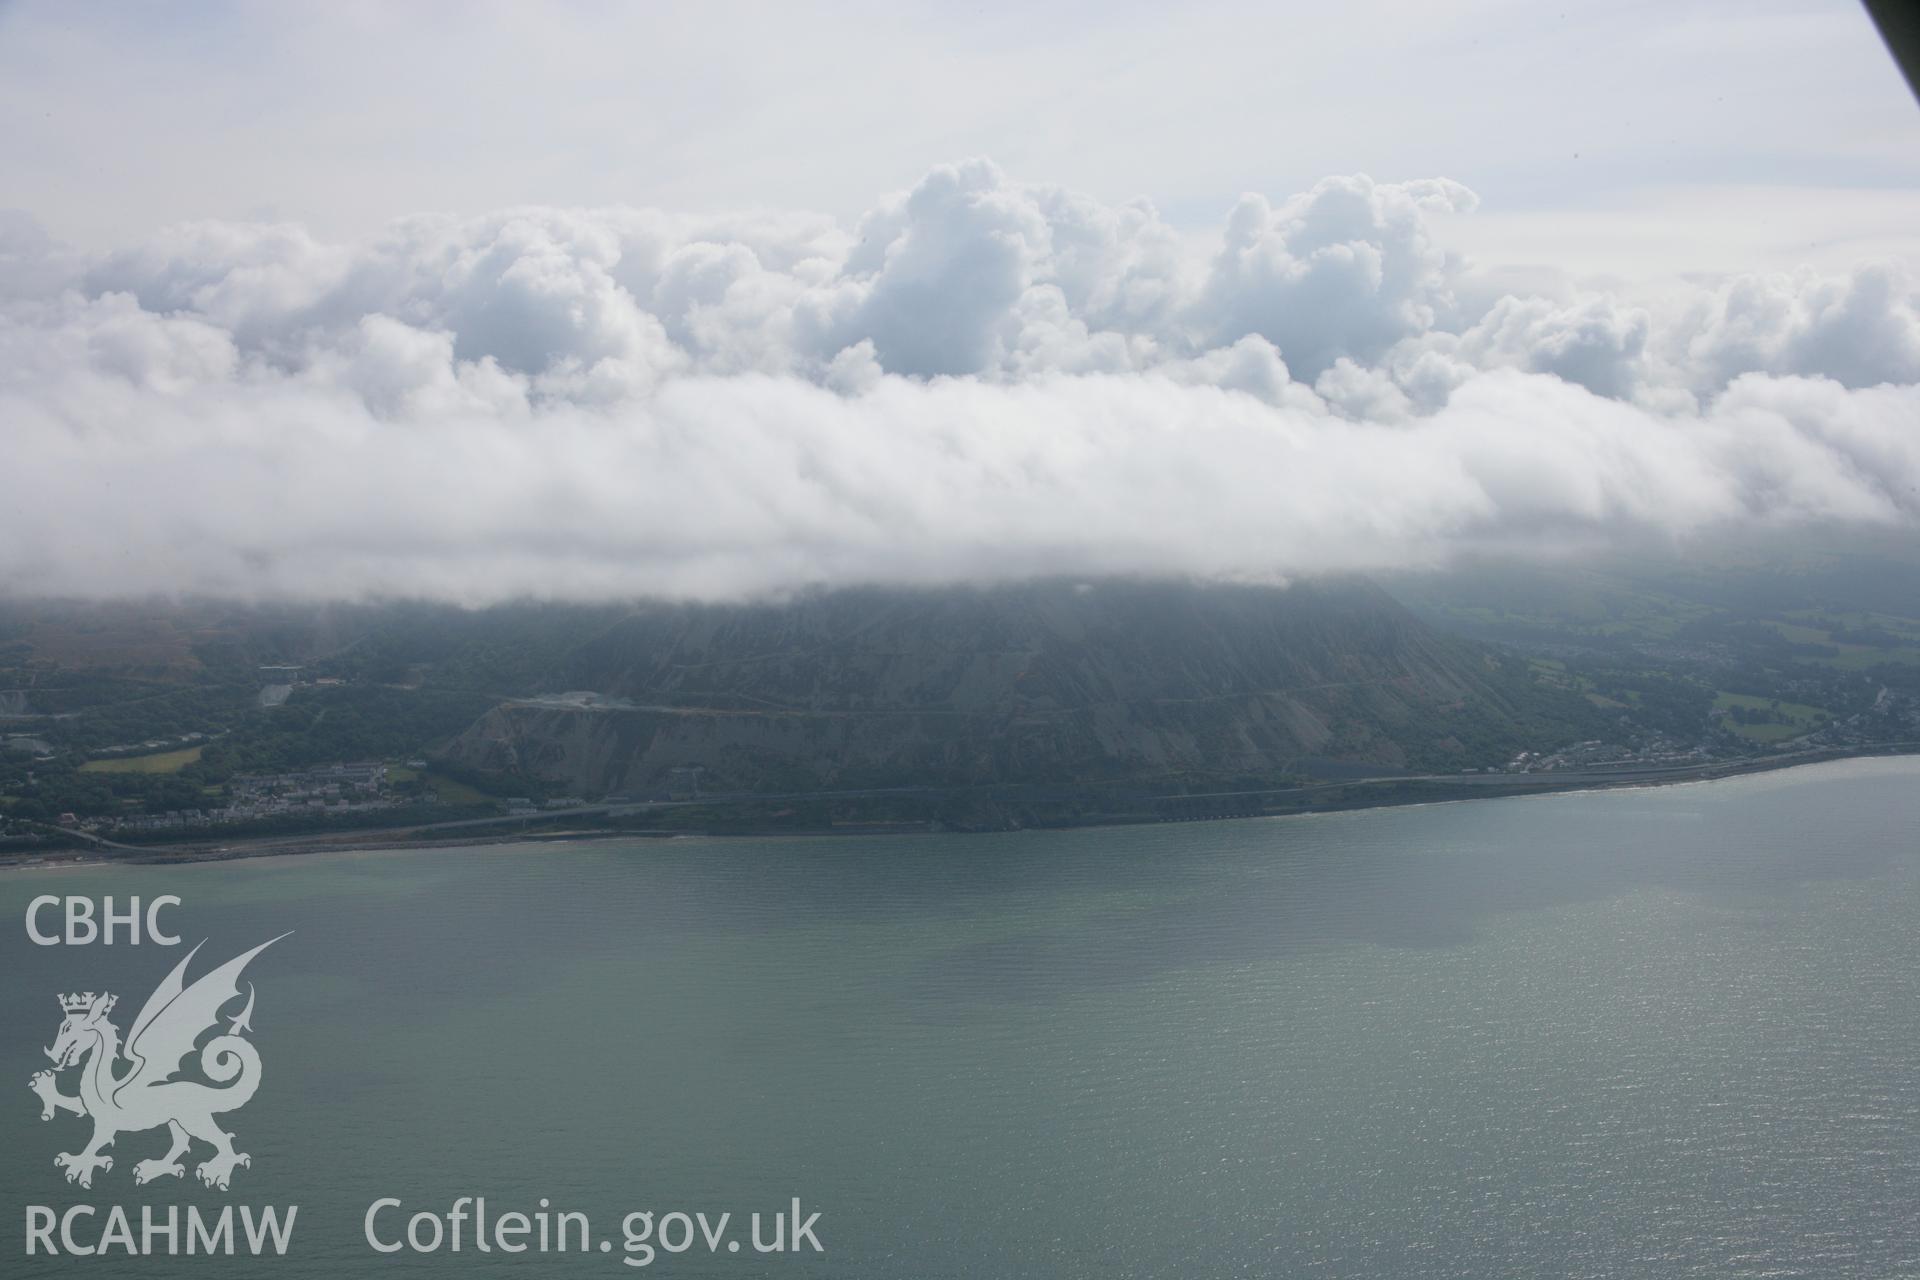 RCAHMW colour oblique aerial photograph of Penmaenmawr Stone Quarry, under cloud, in landscape view from the north. Taken on 14 August 2006 by Toby Driver.